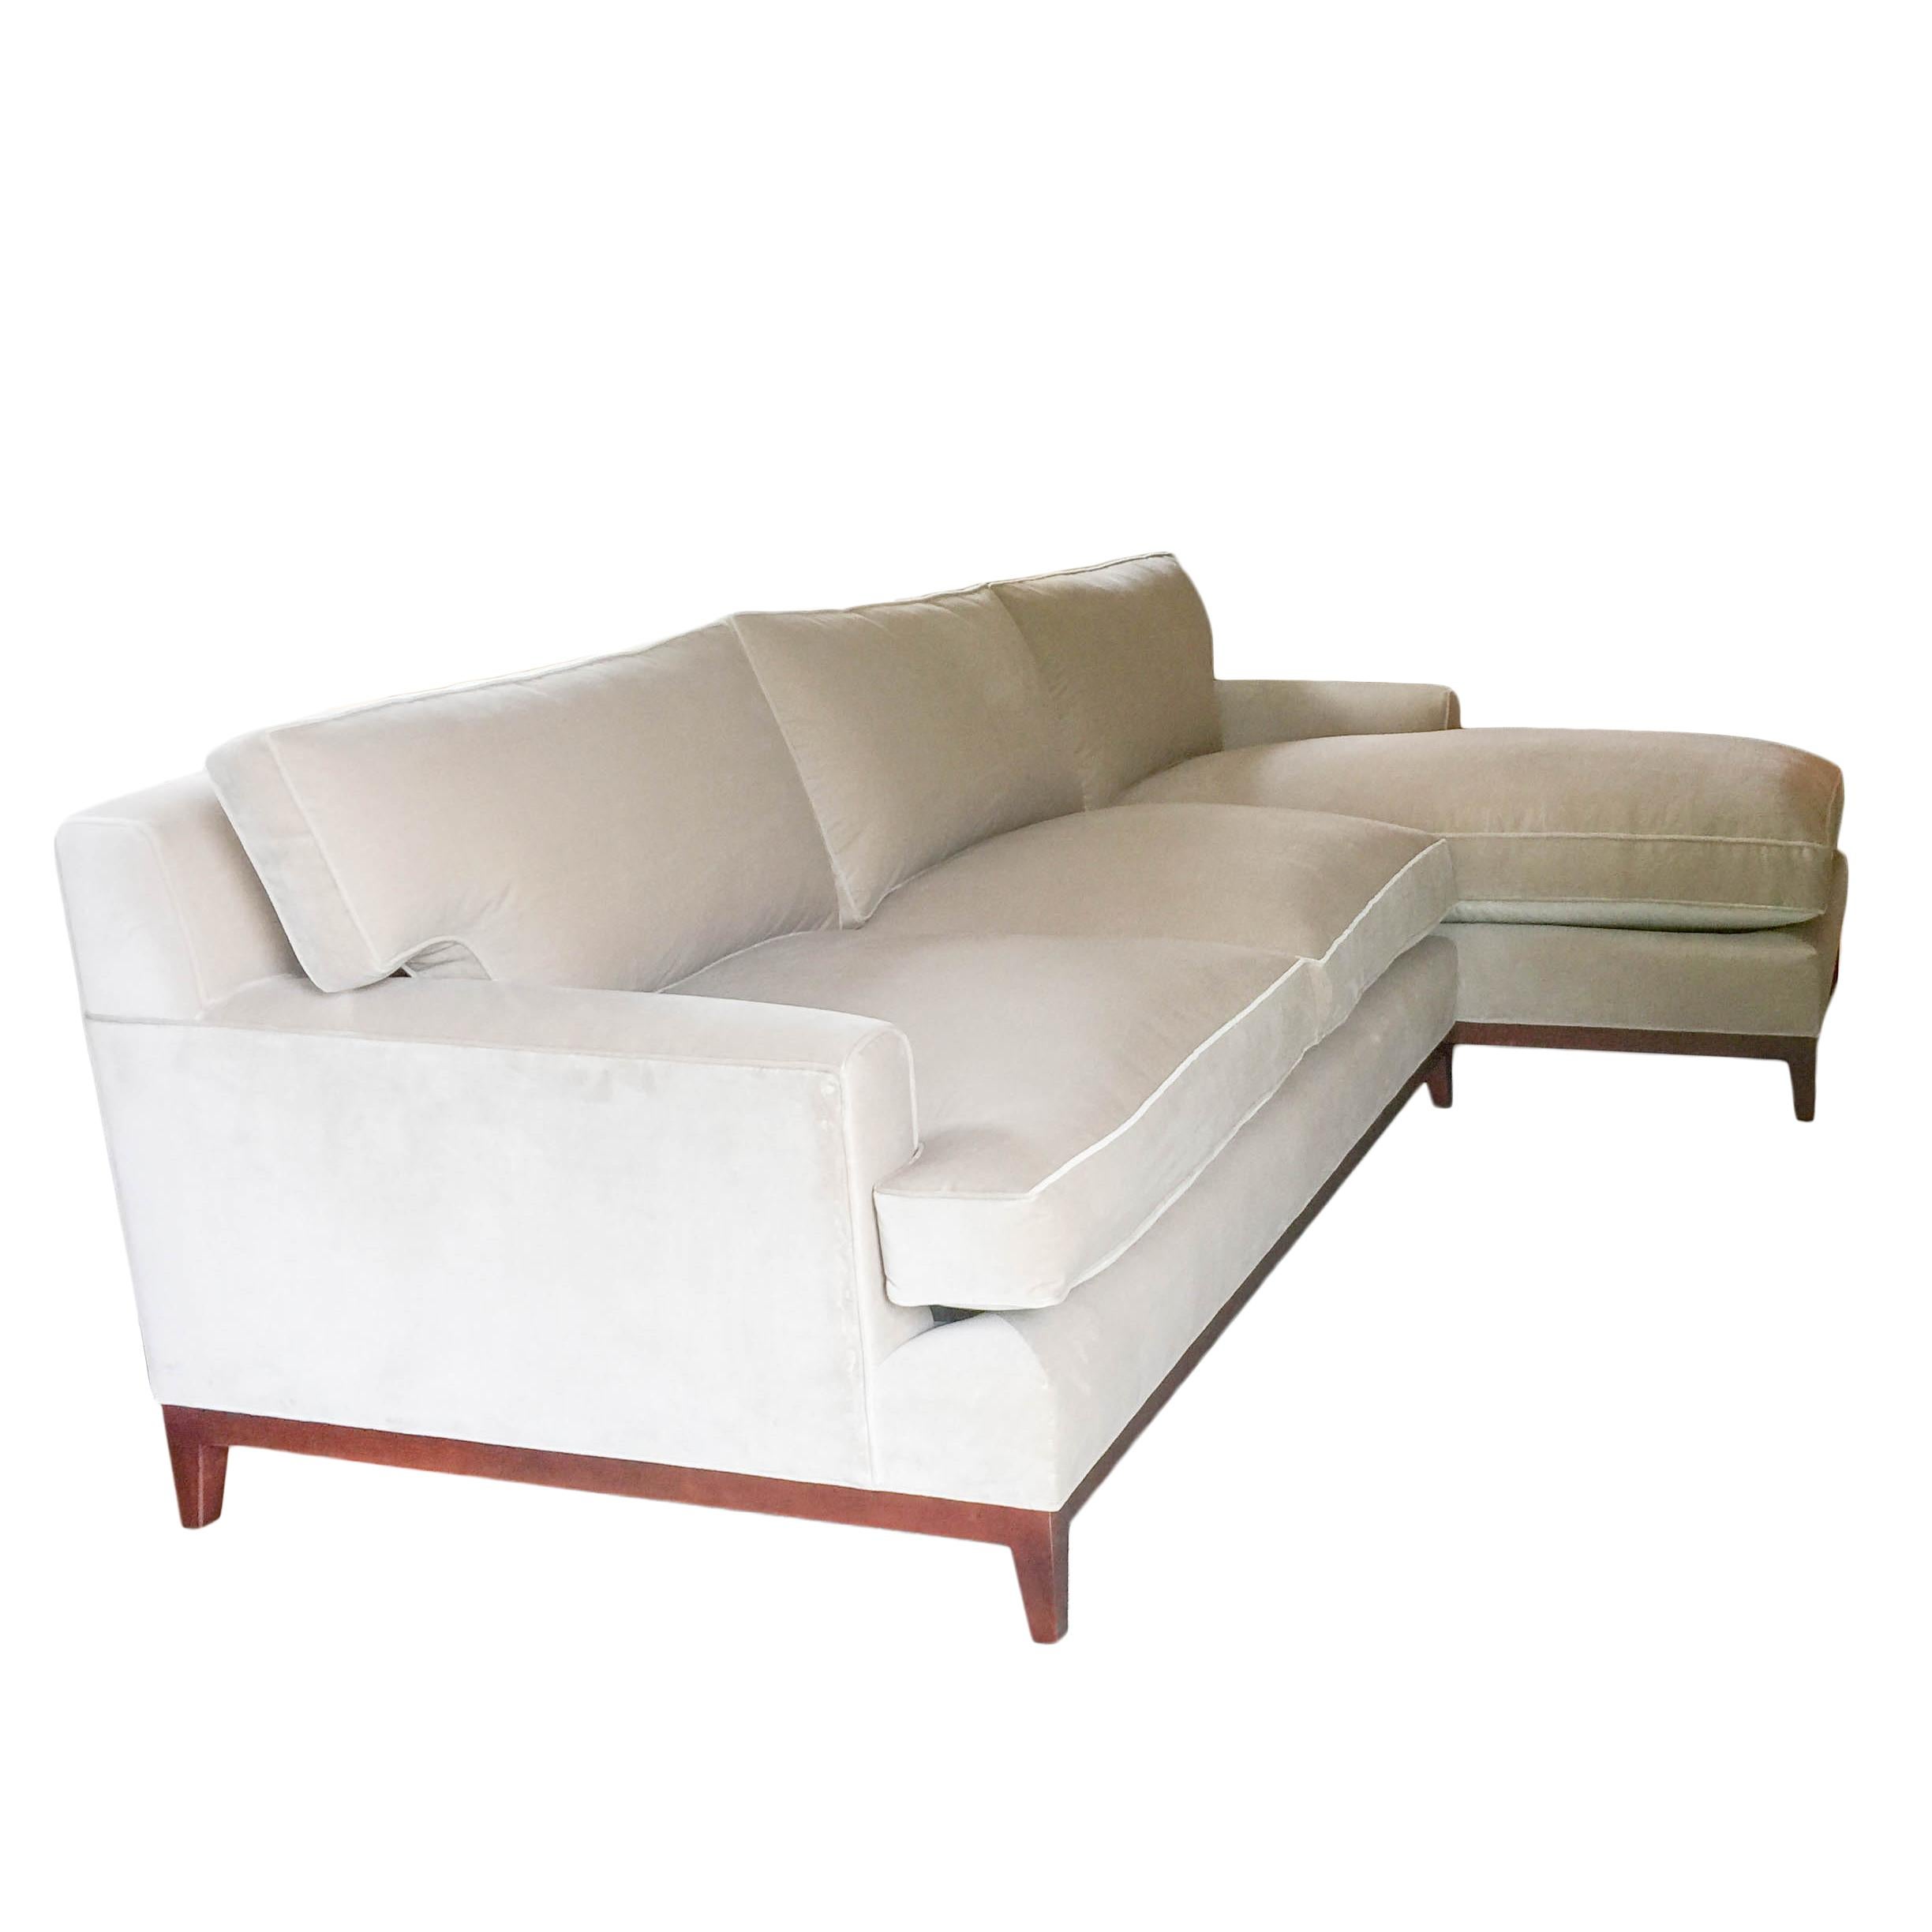 loveseat with chaise lounge